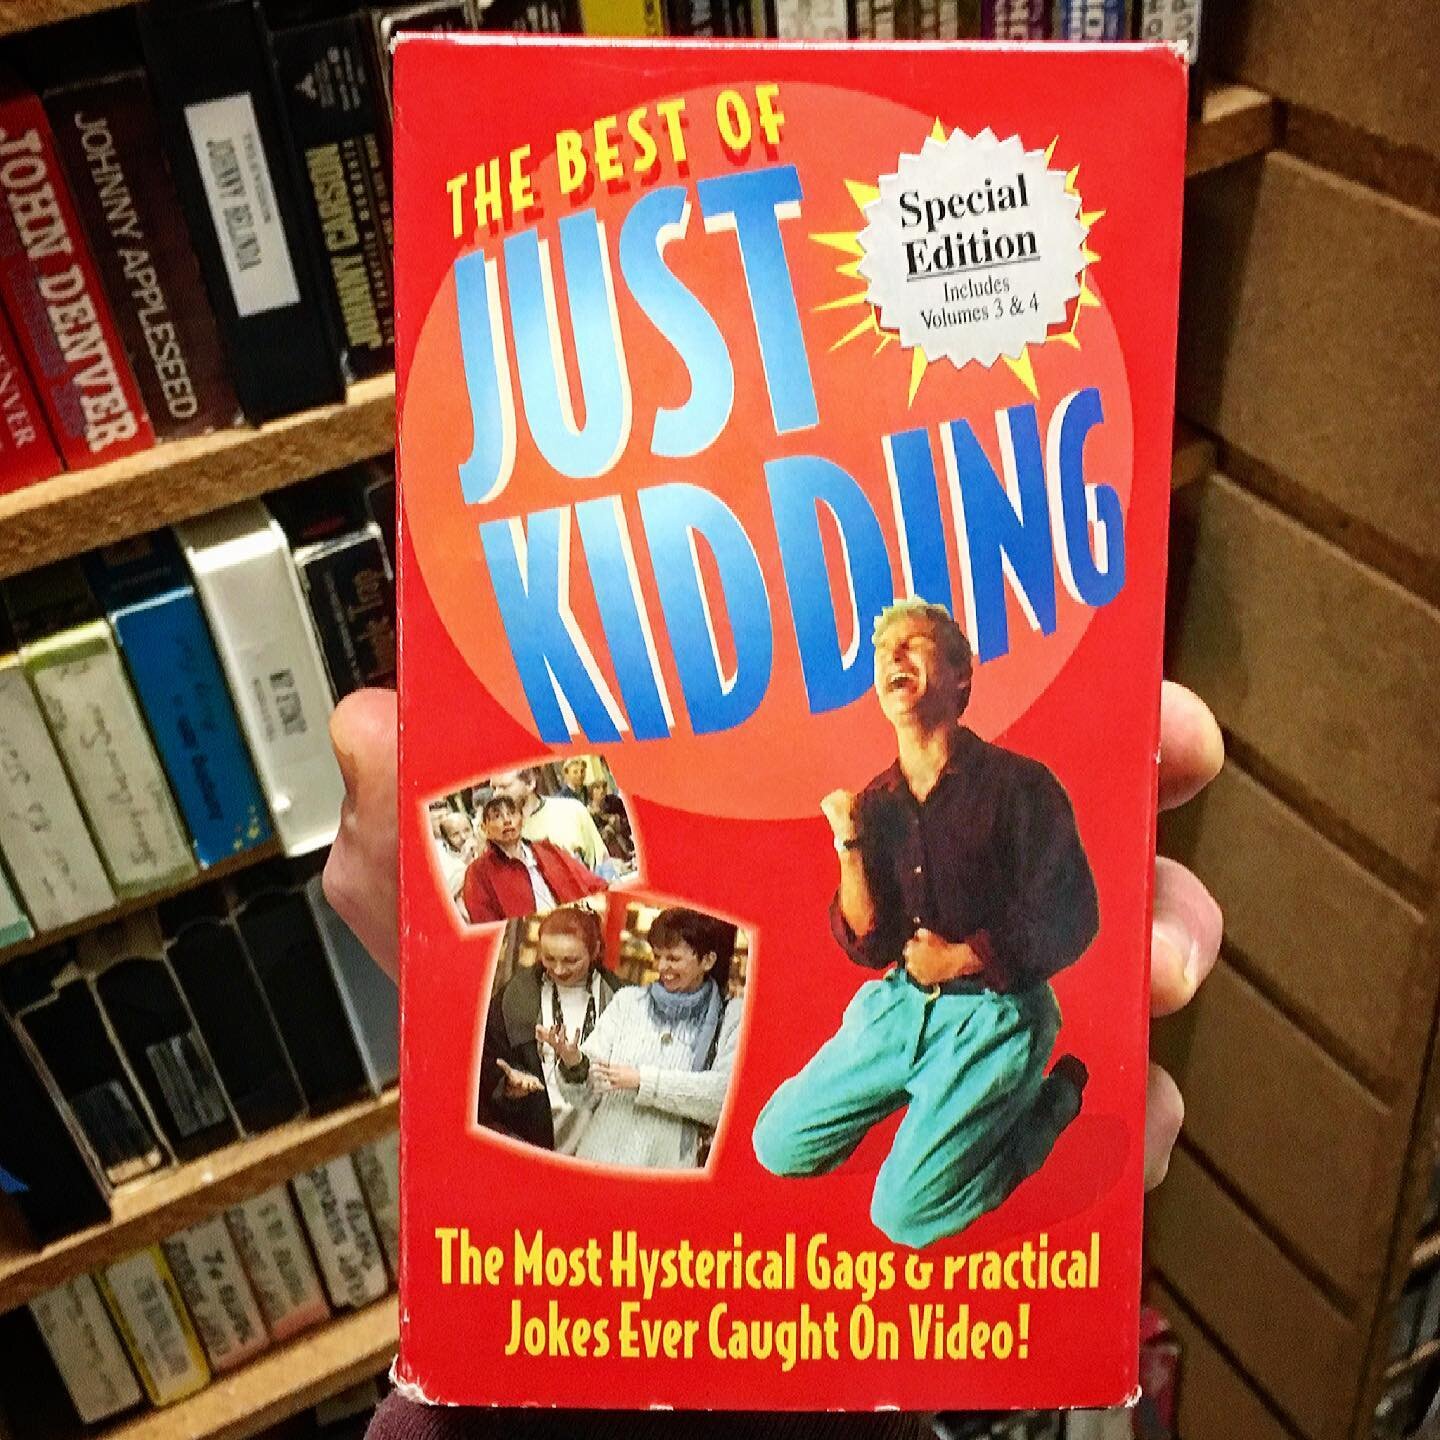 The Best of Just Kidding (1995) 📼 #VHS #Comedy #CandidCamera #Prank #90s #Jokes #Gag #sorrynotsorry